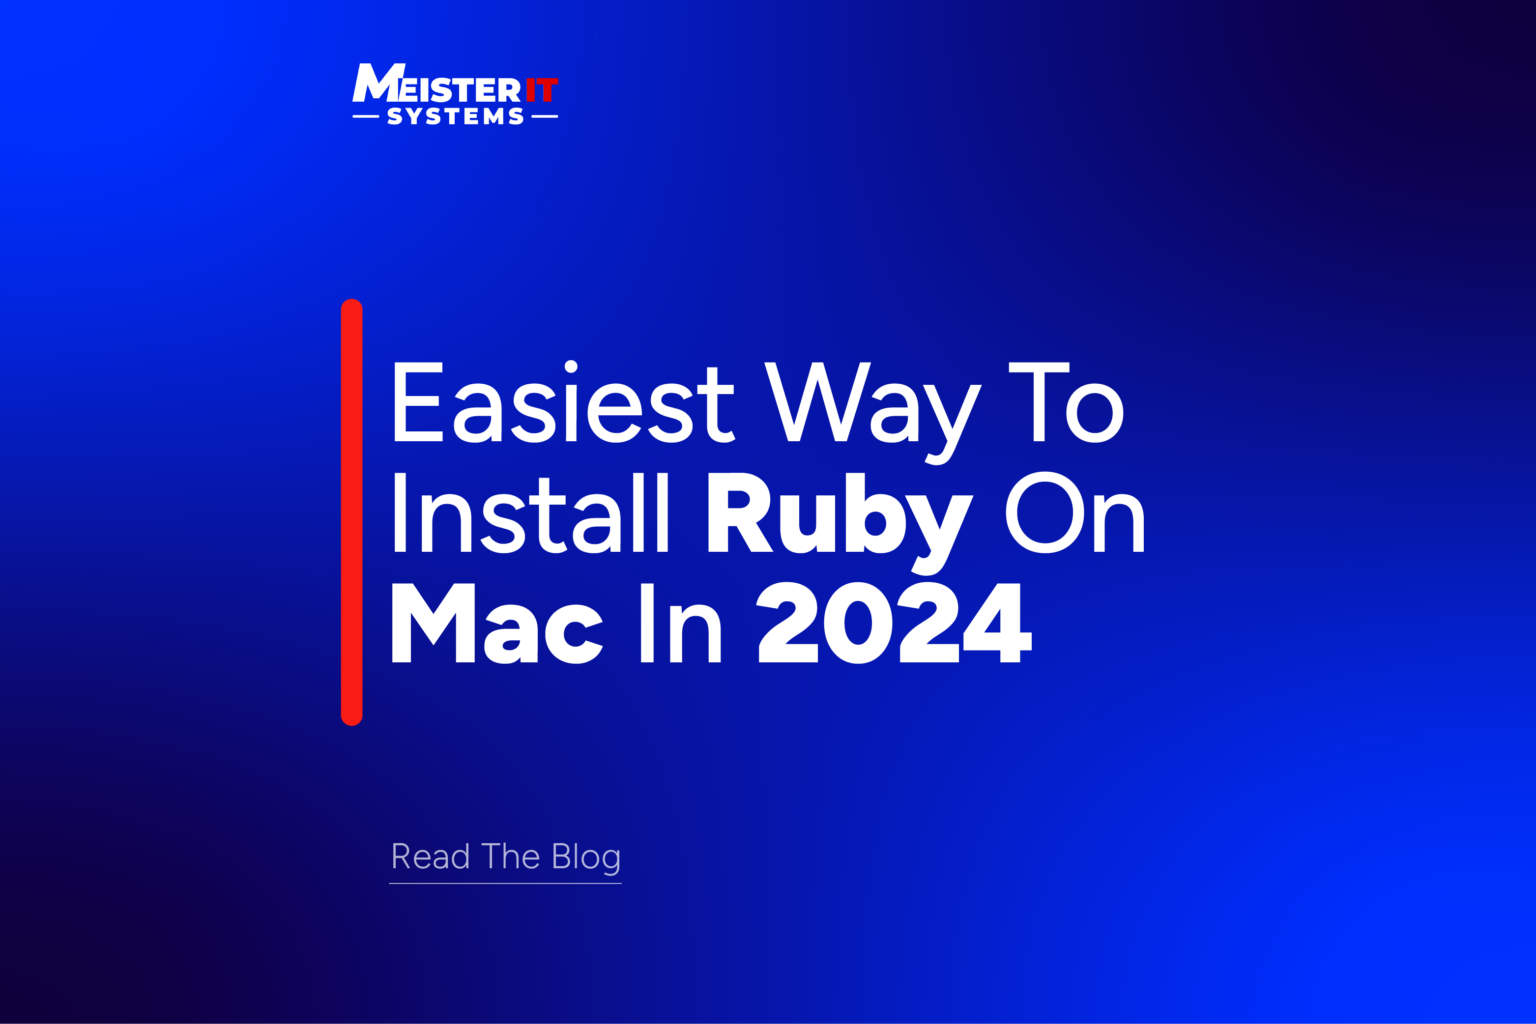 Easiest Way To Install Ruby On Mac In 2024